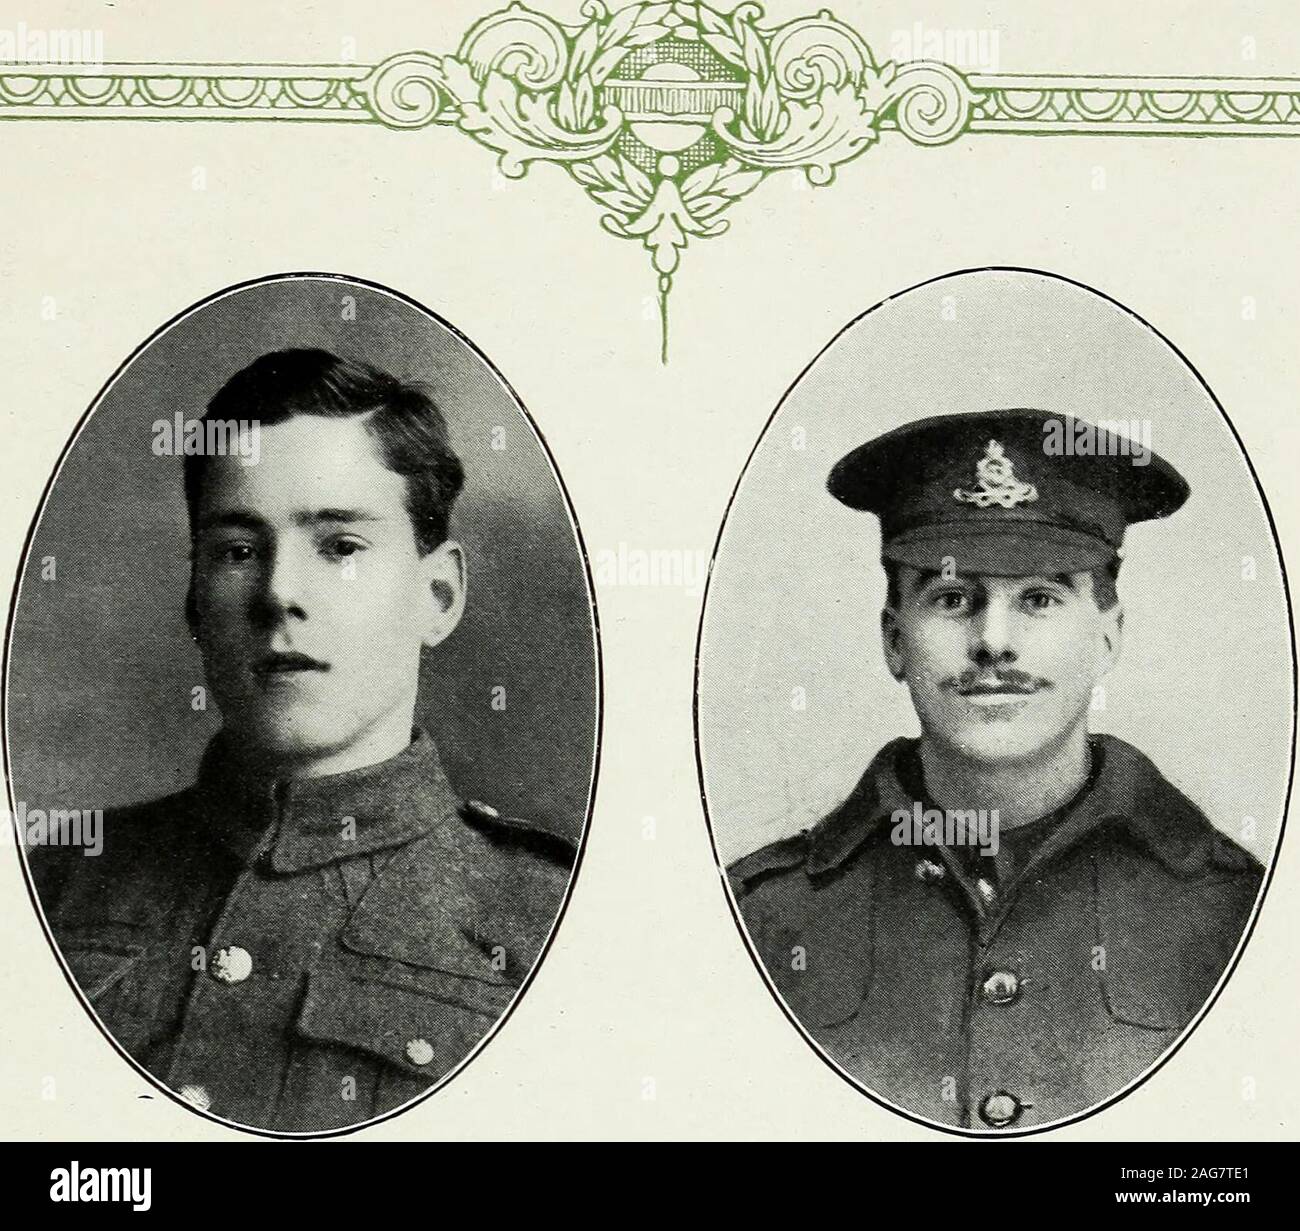 . Record of partners, staff and operatives who participated in the Great War, 1914-1919. Pte. John Purdie. 3/4th Seaforth Highlanders. Pte. Purdie joined the Colours in February, 1919, andserved in France. L/Cpl. W. J. Rae. 2nd Royal Scots Fusiliers. L/Cpl. Rae enlisted in September, 1914. Transferredto 5th H.L.I. Transport and was drafted for service inFrance. Pte. James Russell. 3rd Cameronians (Scottish Rifles). Pte. Russell enlisted in March, 1917. Served in U.K.,and was discharged in August, 1919. Pte. J. Smith. Highland Light Infantry. Pte. Smith enlisted in April, 1918, and served in th Stock Photo